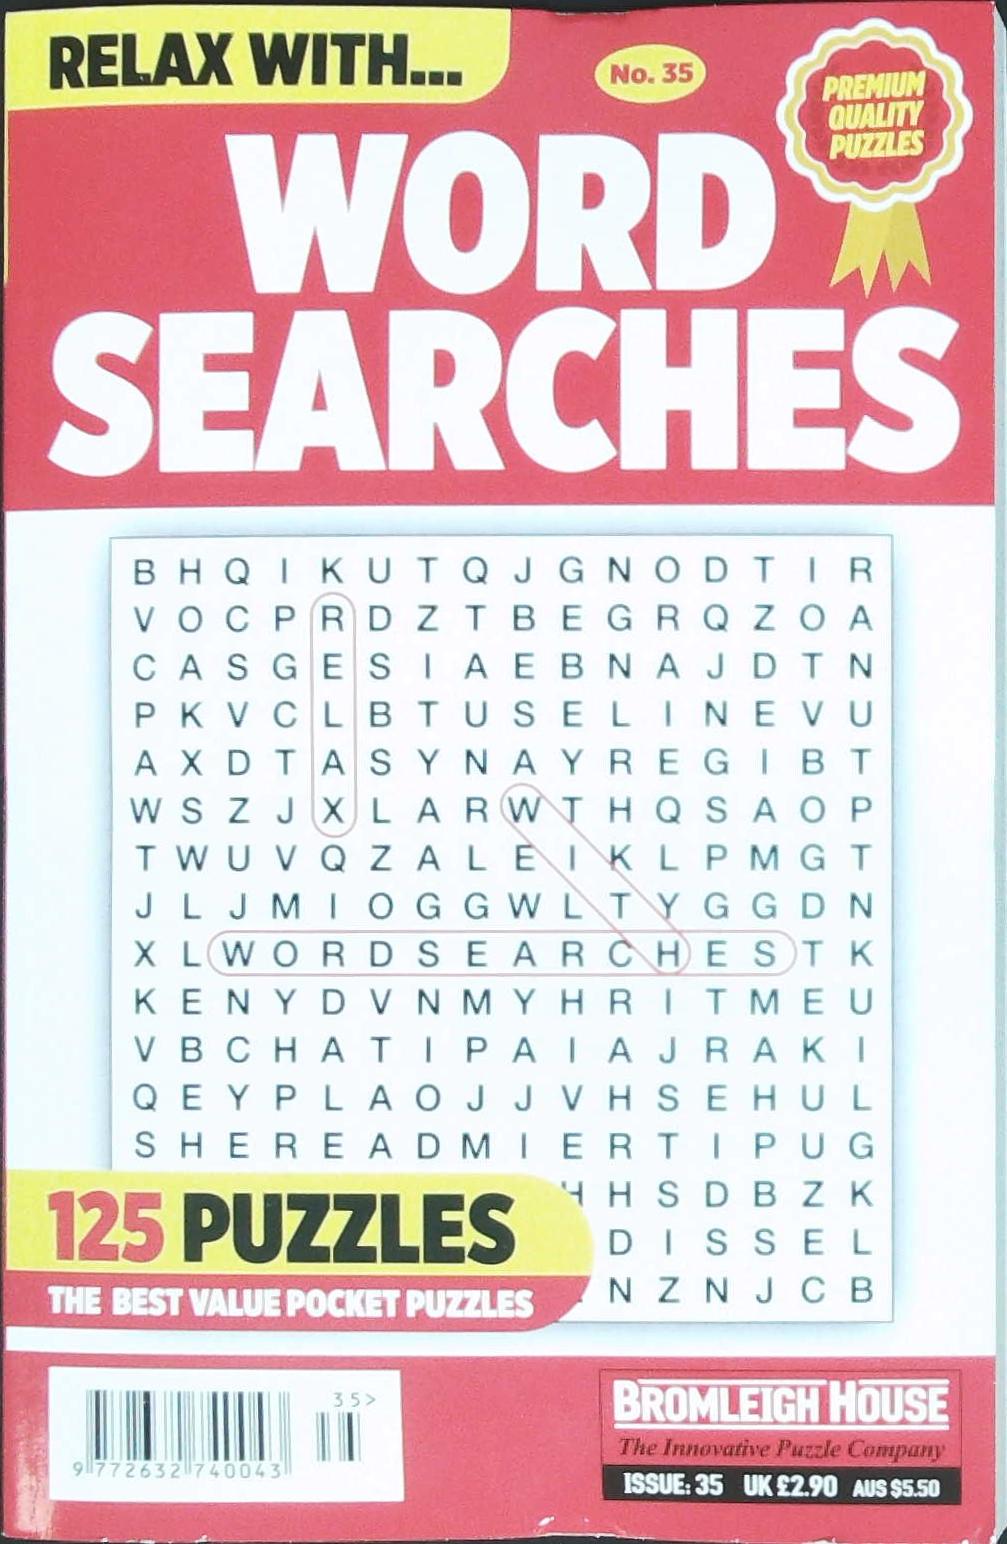 RELAX WITH WORDSEARCHES